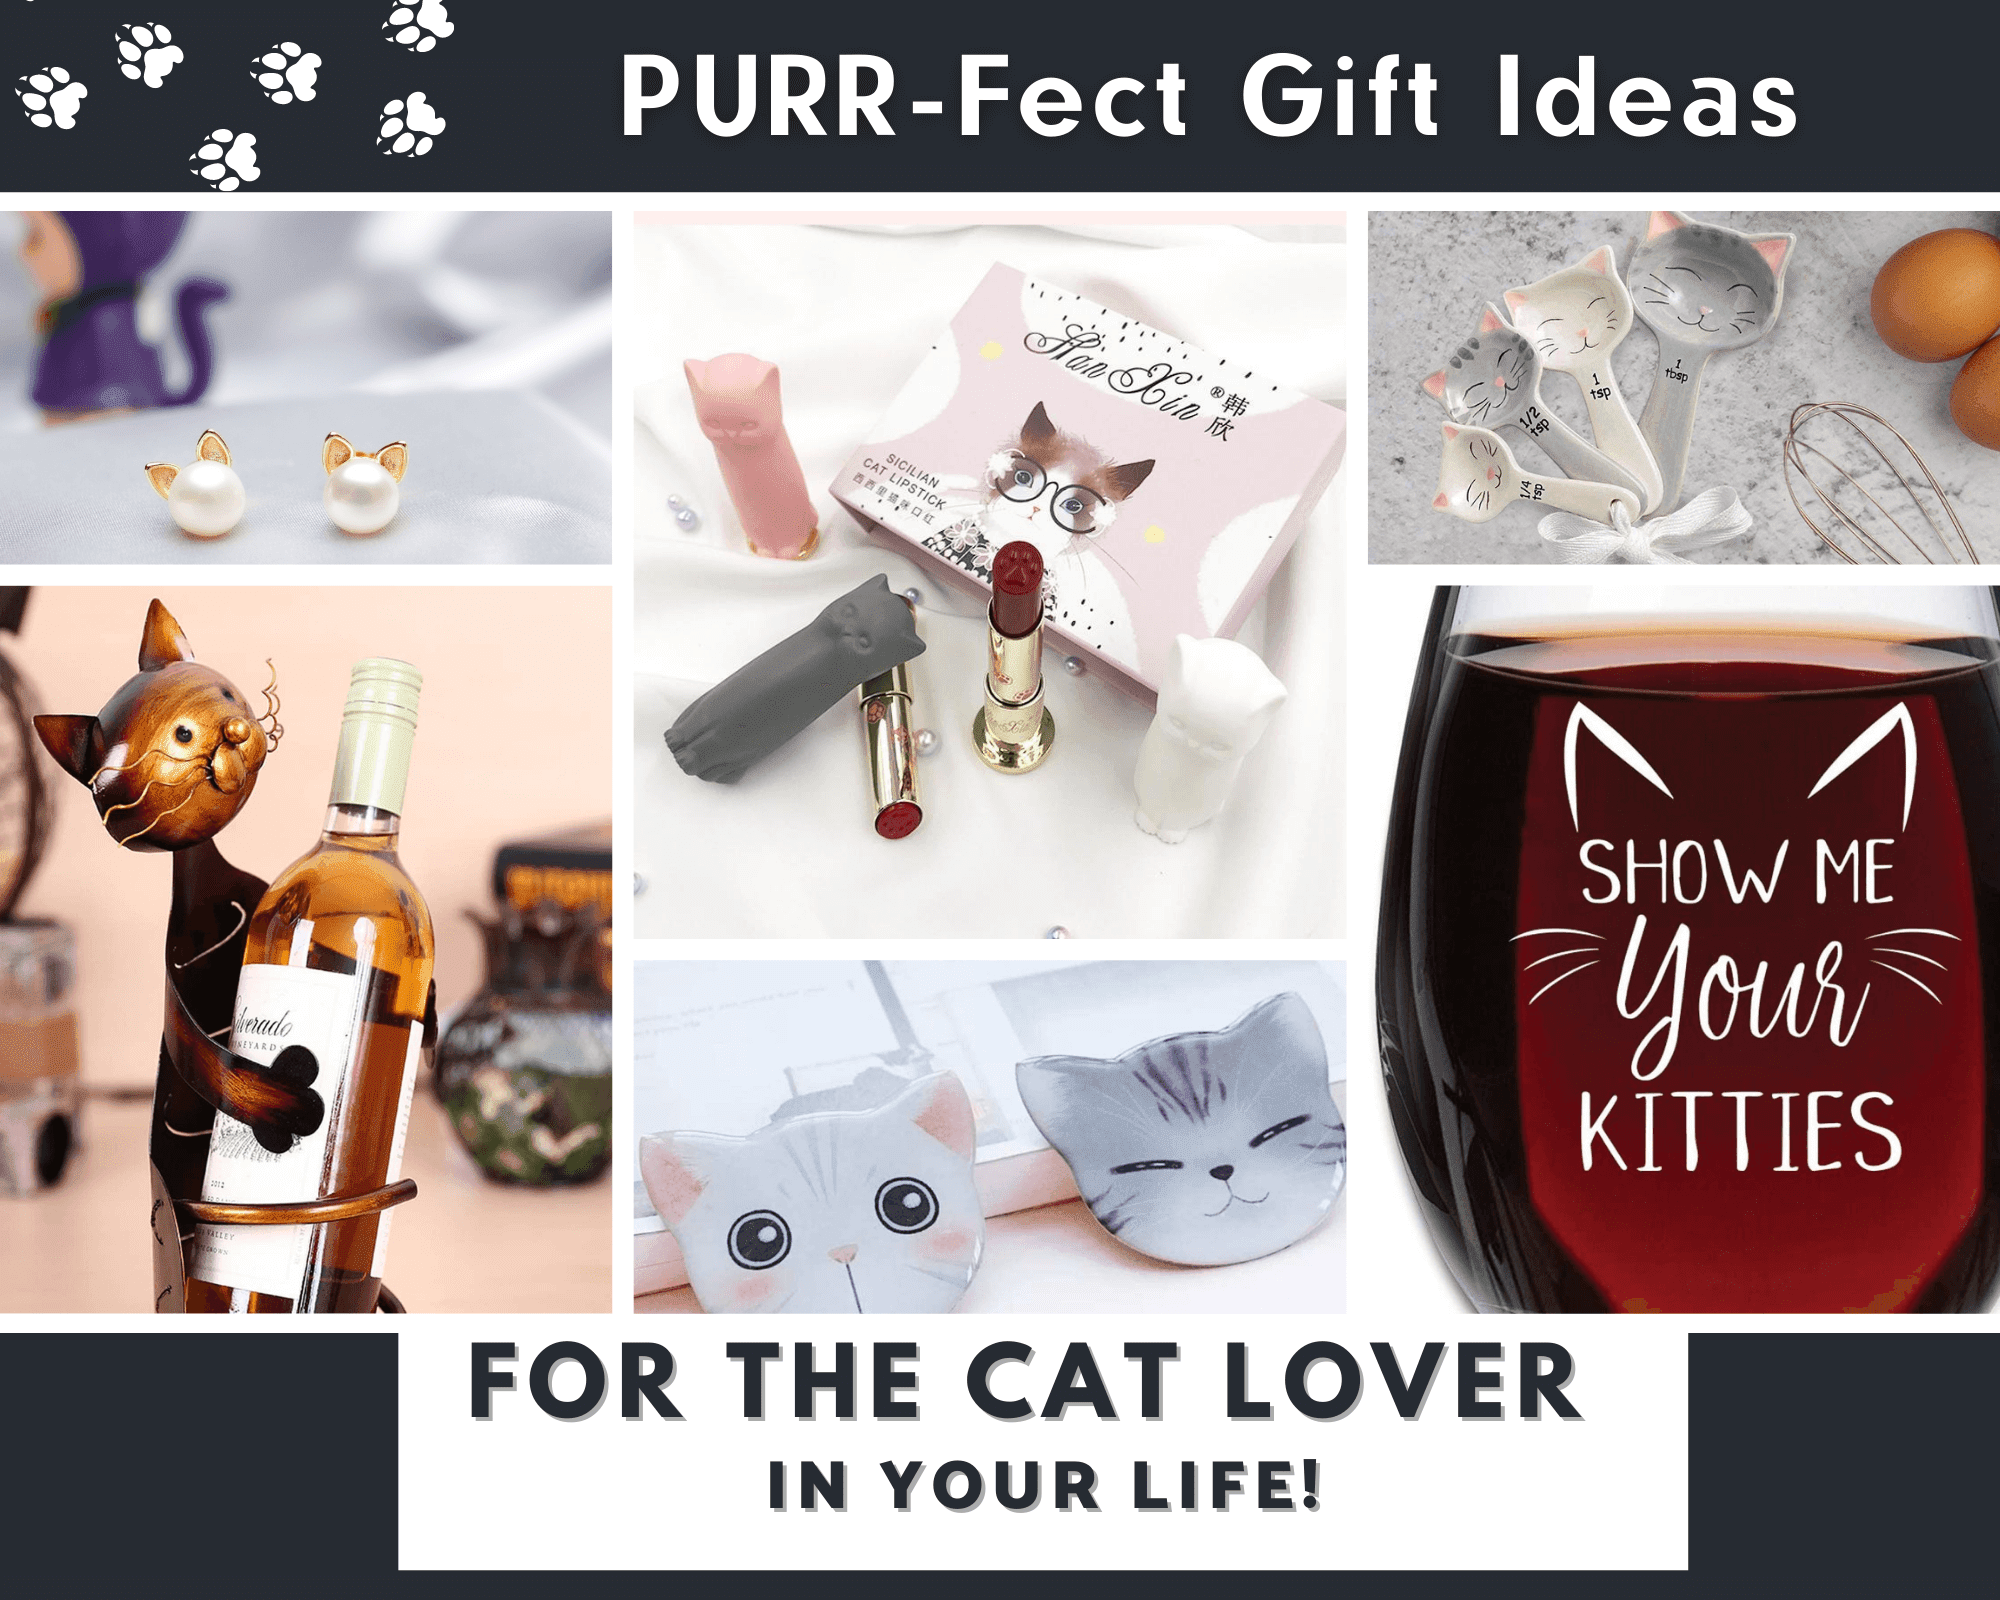 Purrfect Gifts For The Cat Lover In Your Life By Barbies Beauty Bits